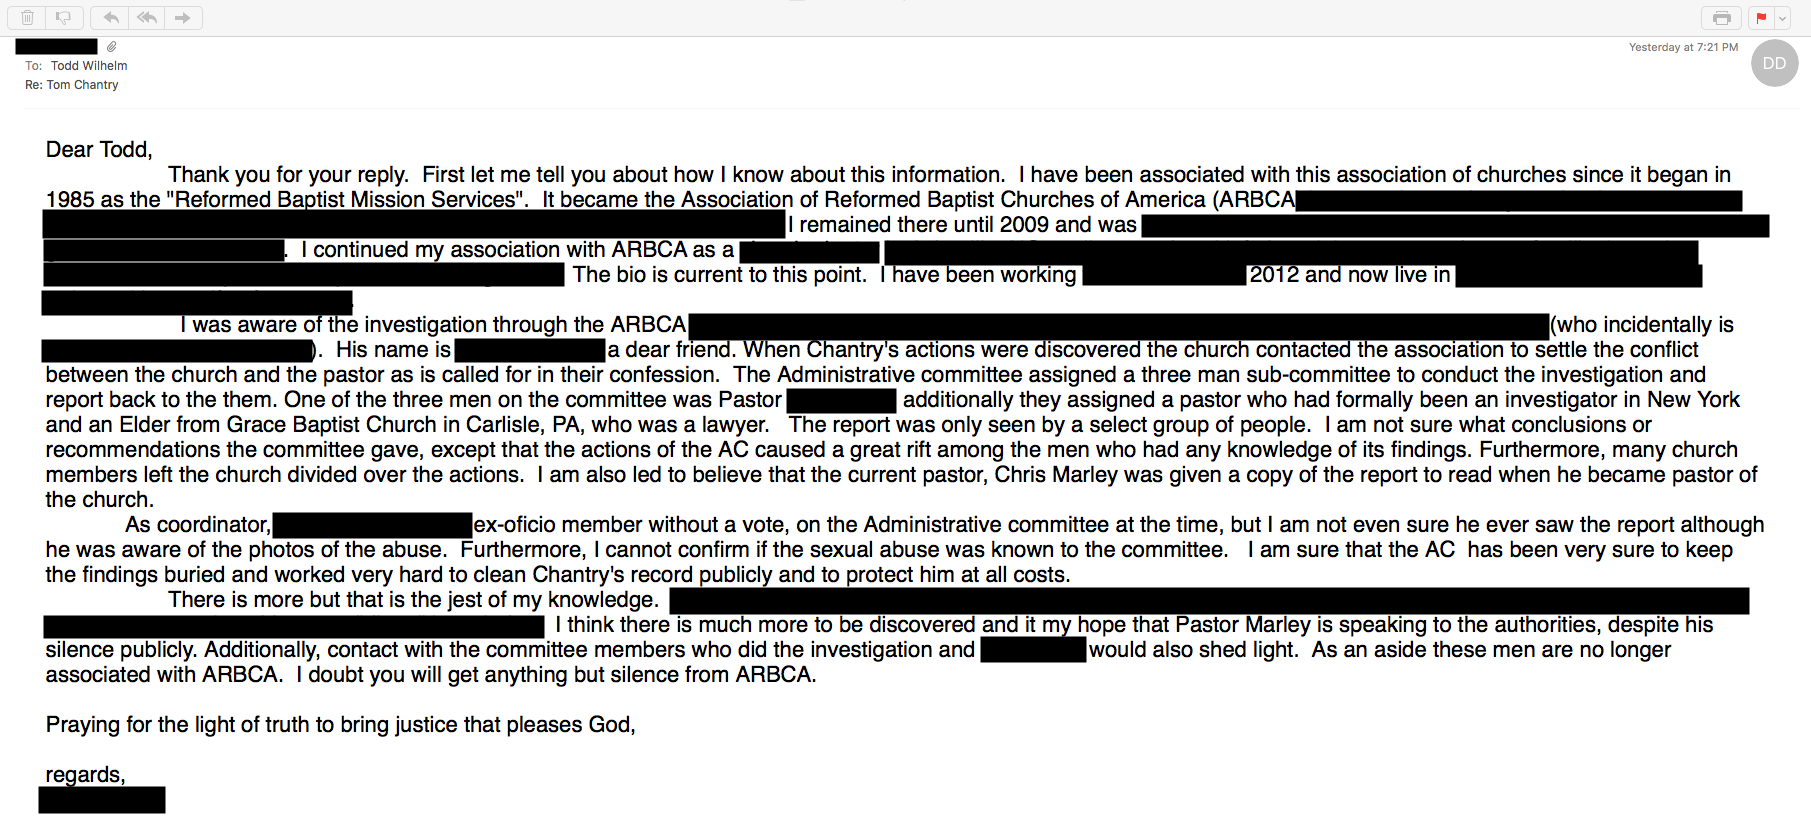 redacted email meaning